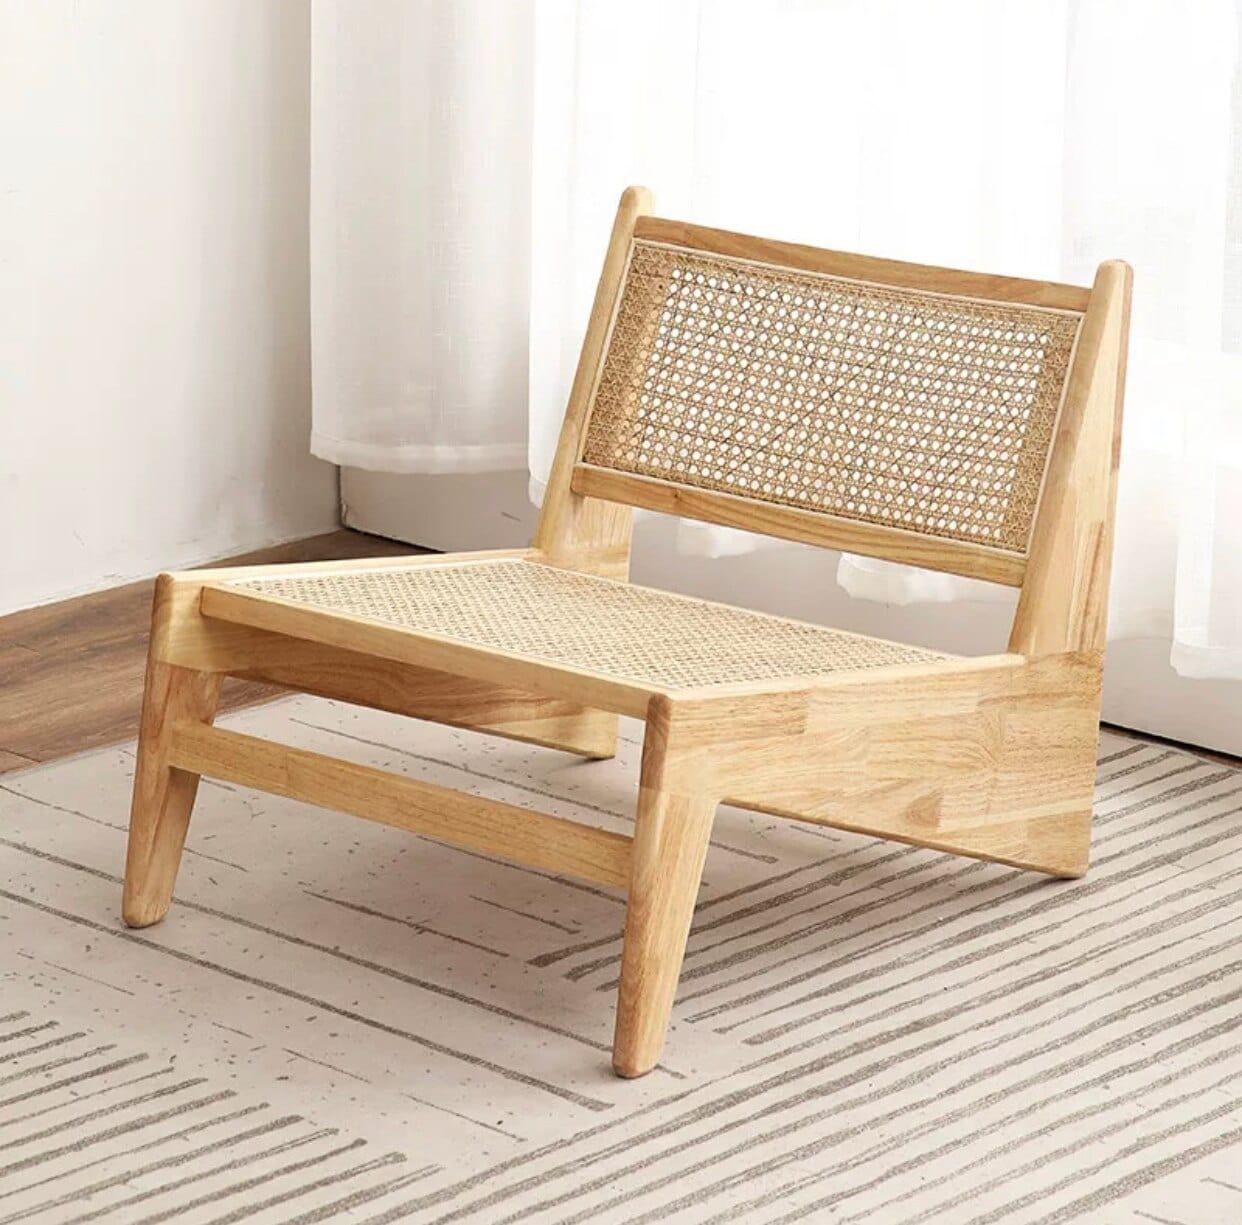 Shop 0 Burlywood Medieval Style Solid Wood Single Sofa Lazy Man Chair Rattan Woven Log Leisure Surprise Lonely Wind Warehouse Di Jar Balcony Mademoiselle Home Decor